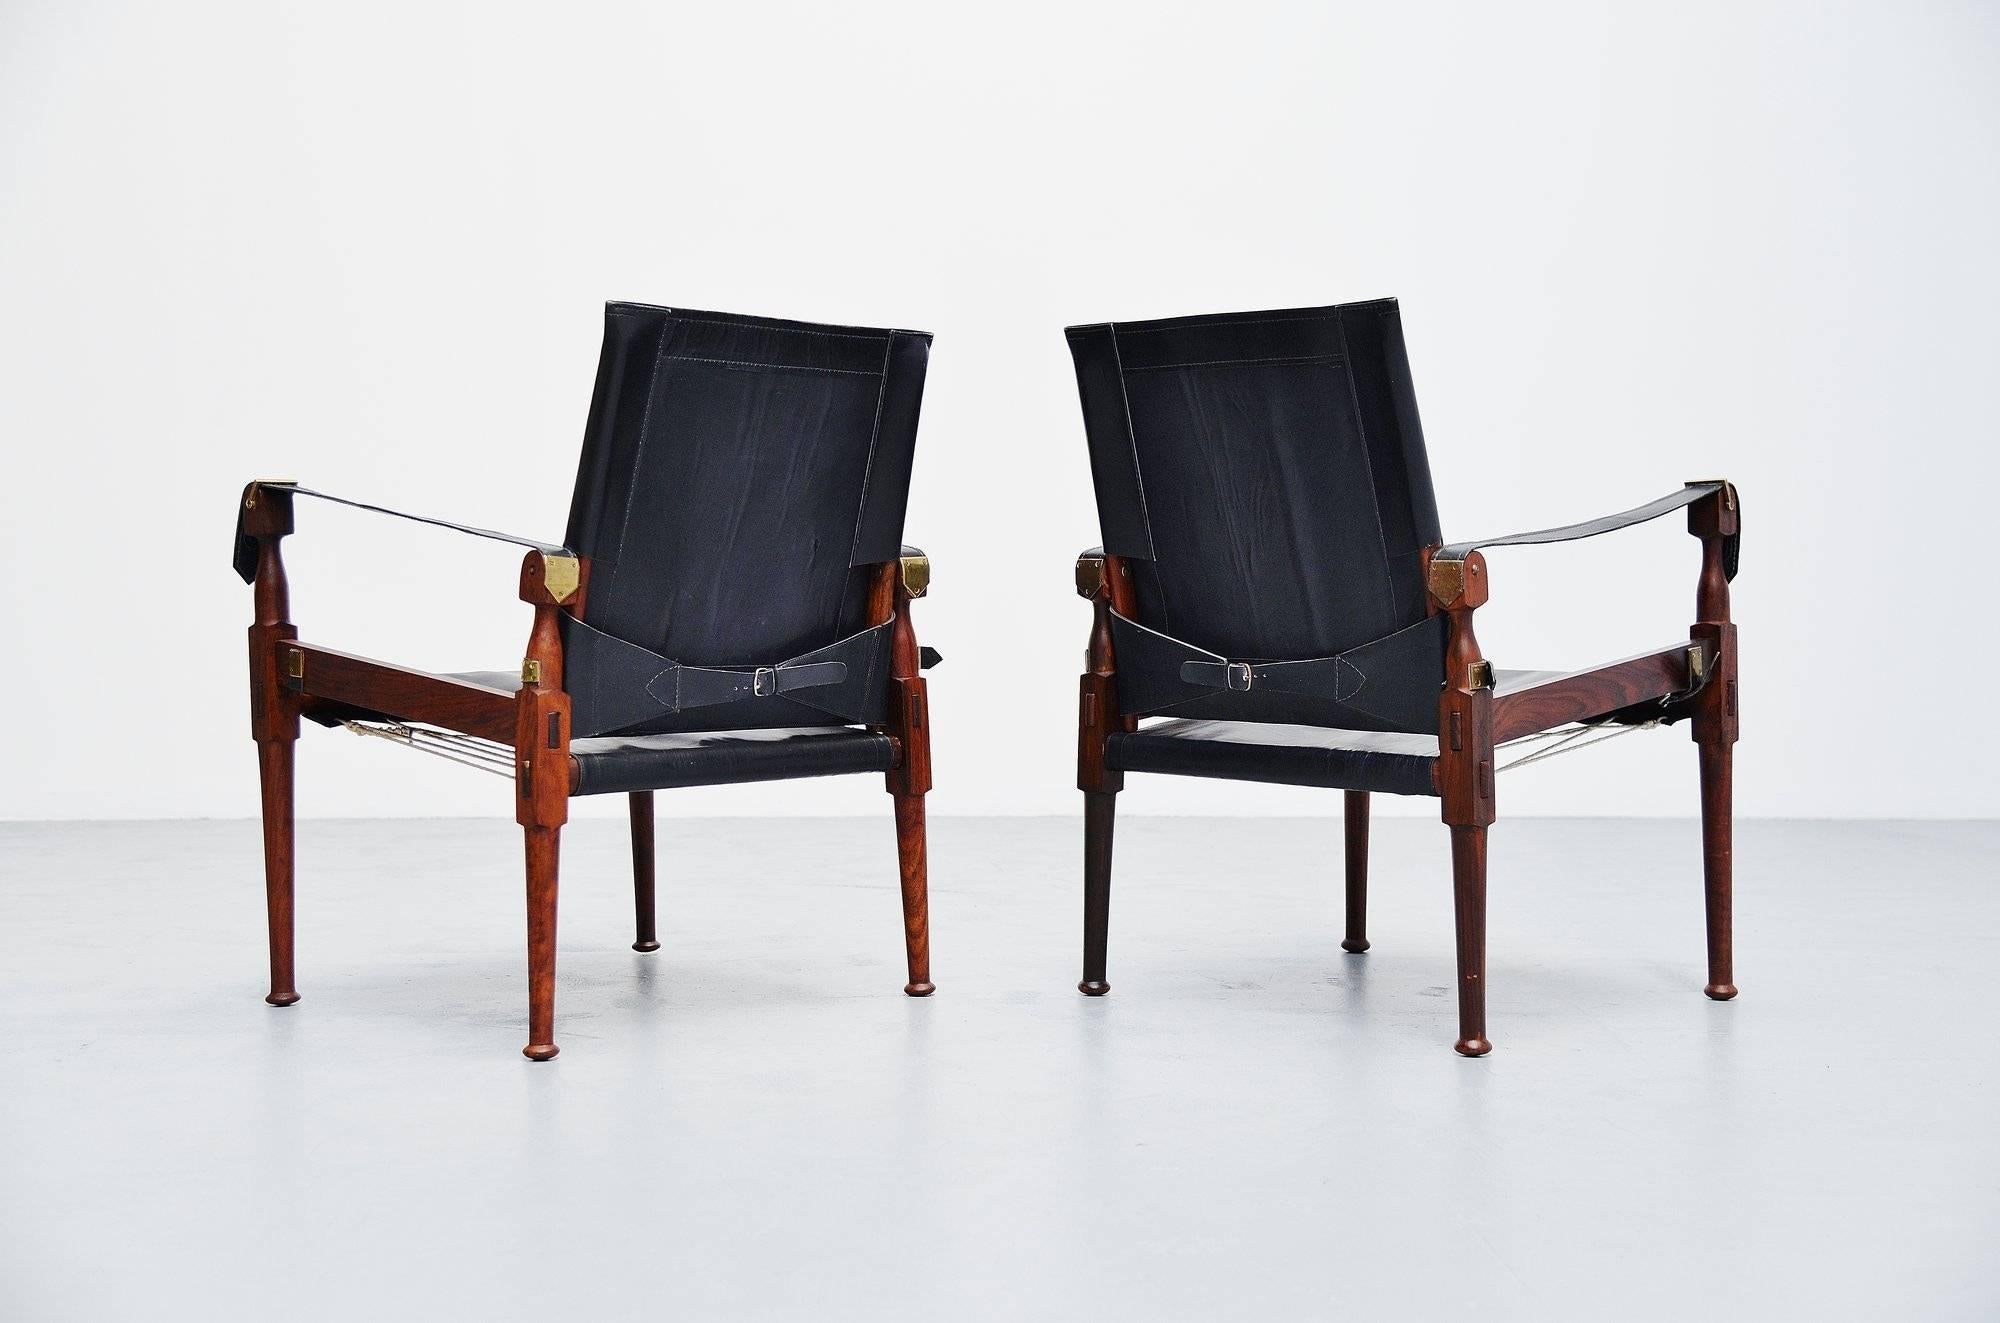 Very nice pair of so called safari chairs designed and manufactured by M. Hayat & Brothers, Pakistan 1970. M. Hayat & Brothers produced a lightweight, portable armchair based on the model of the English officers' chairs. These chairs are easy to